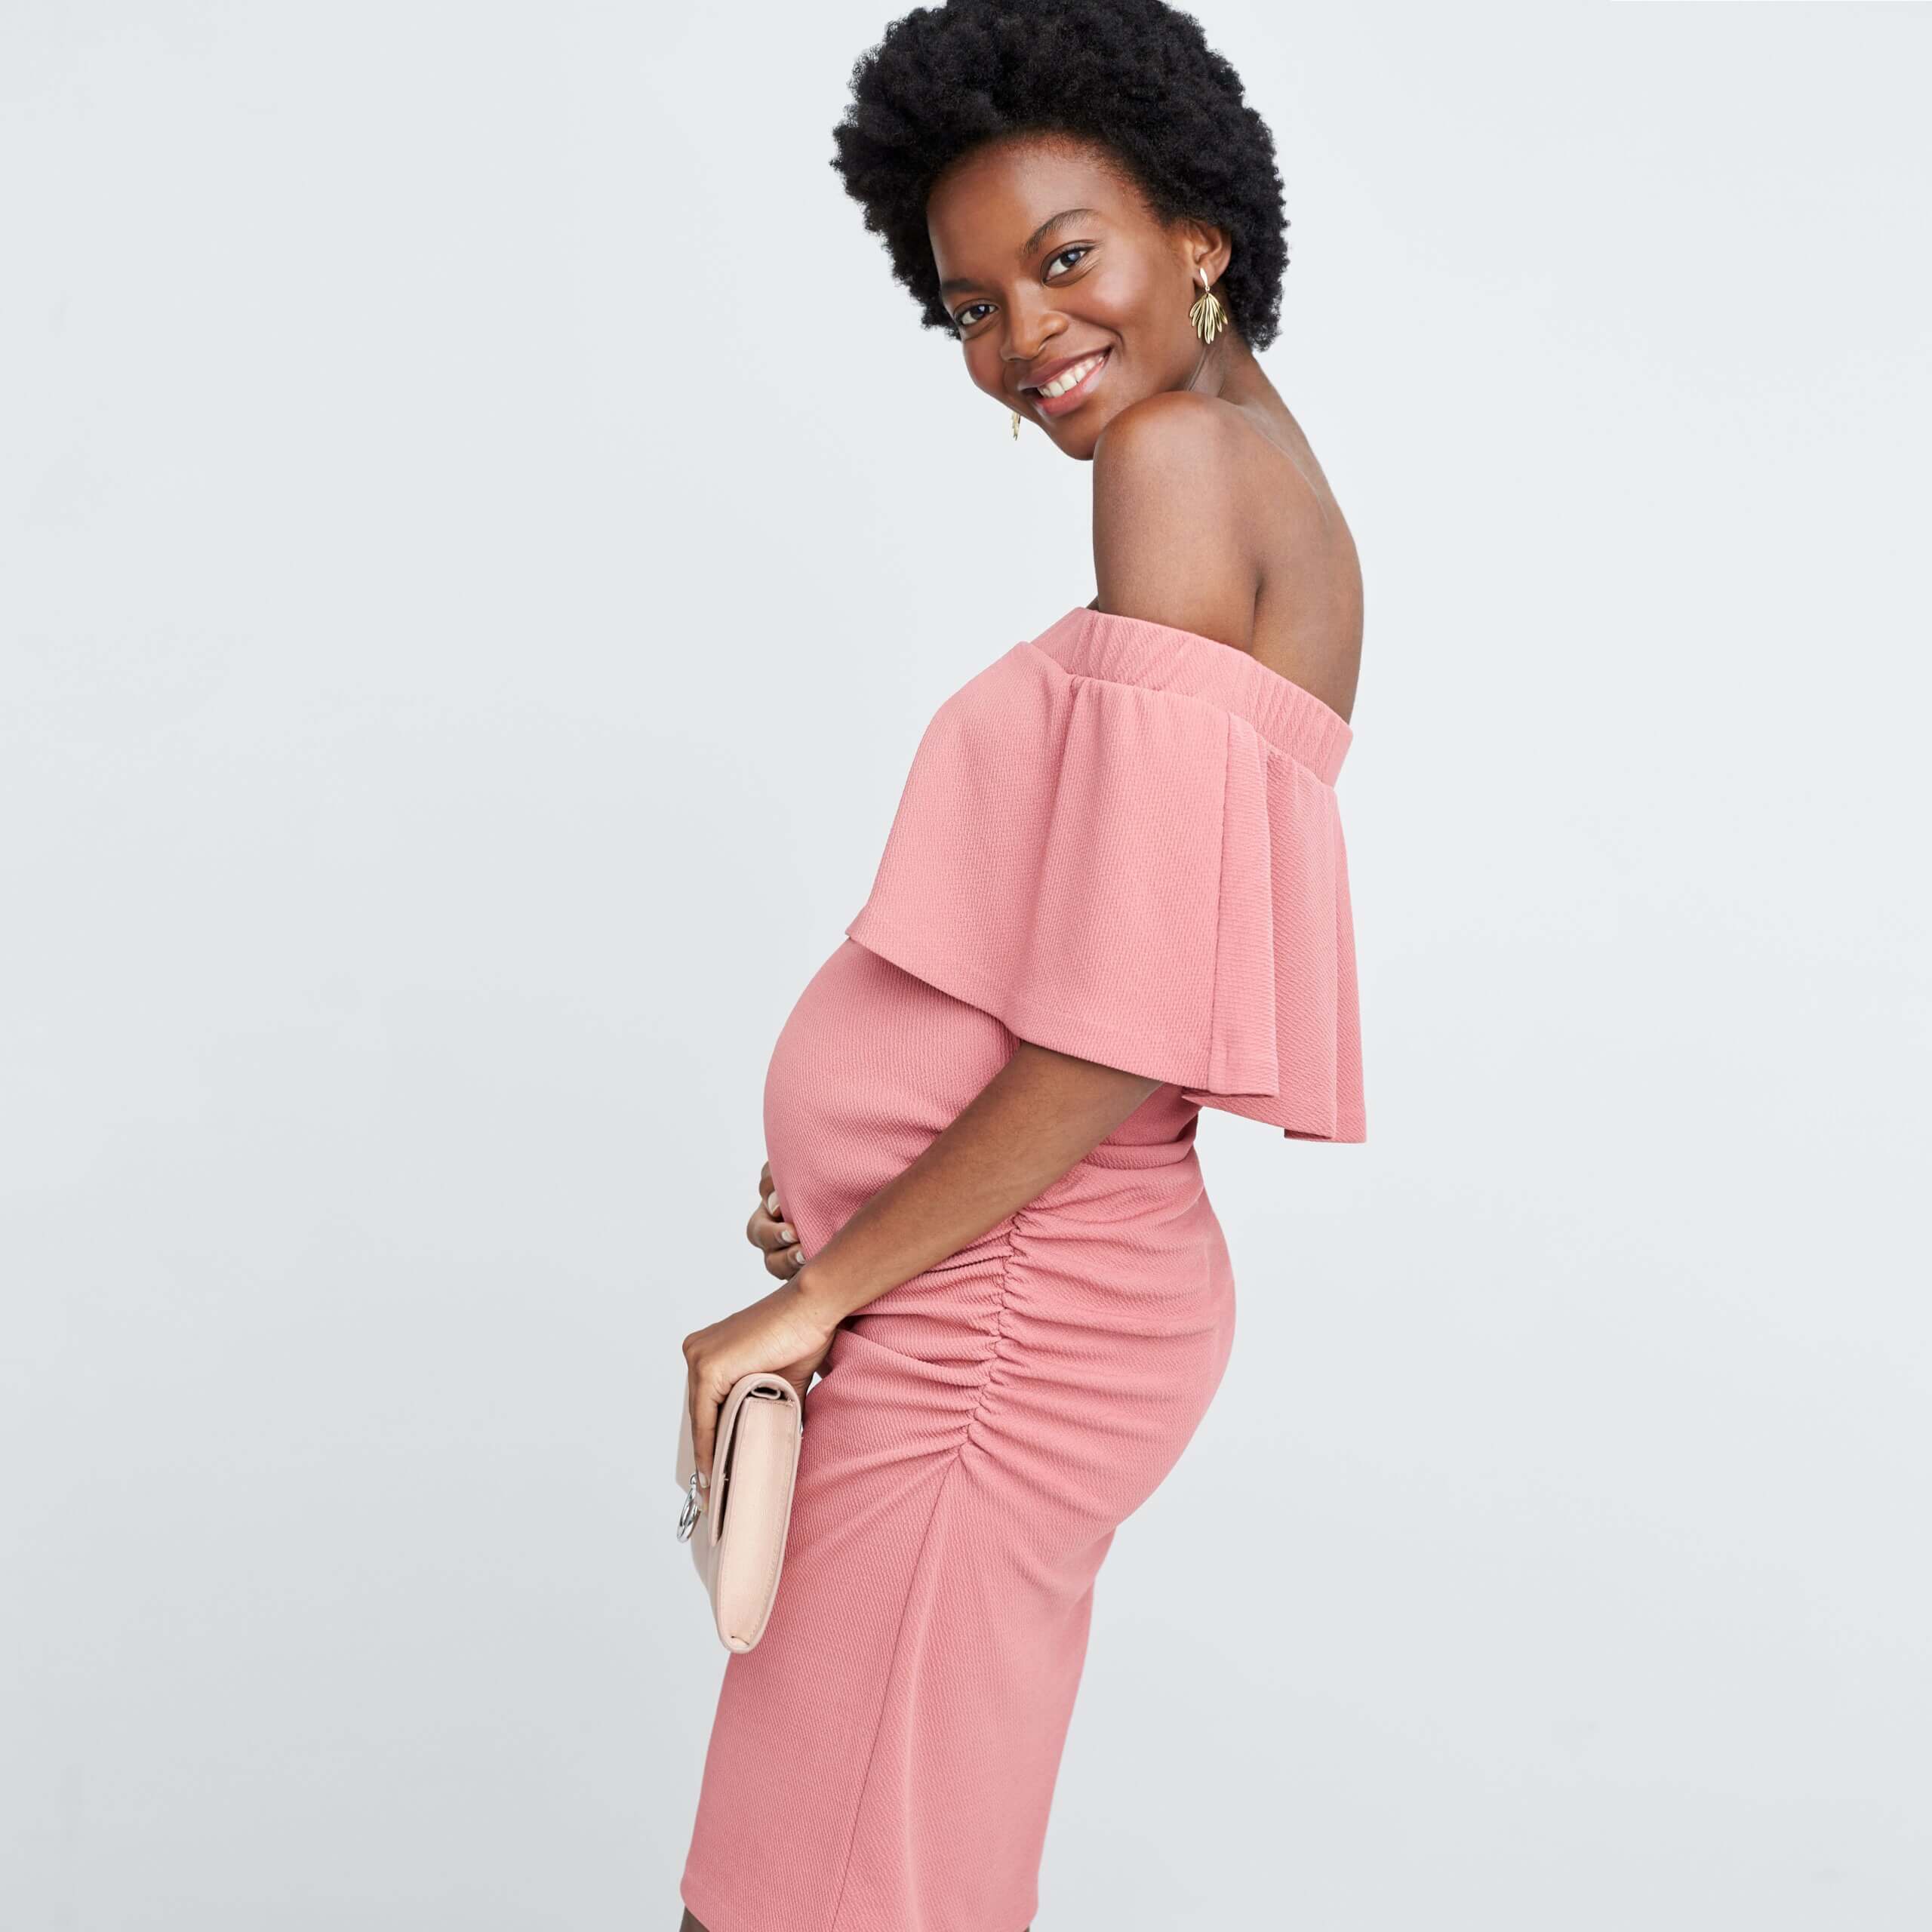 How and when to buy a maternity bra, The Insider Blog